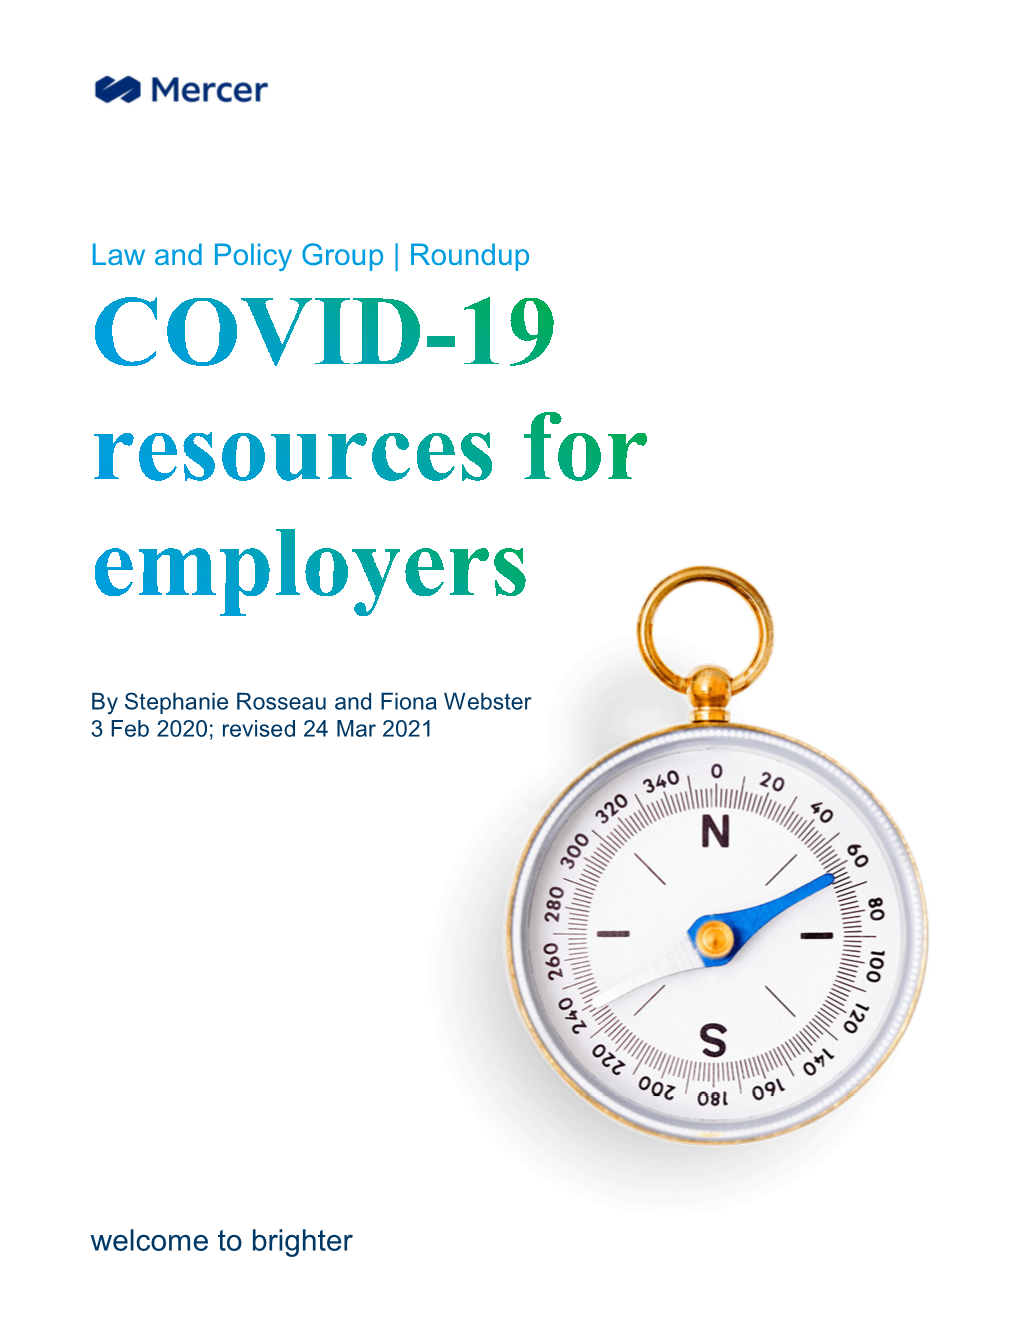 Roundup: COVID-19 Resources for Employers